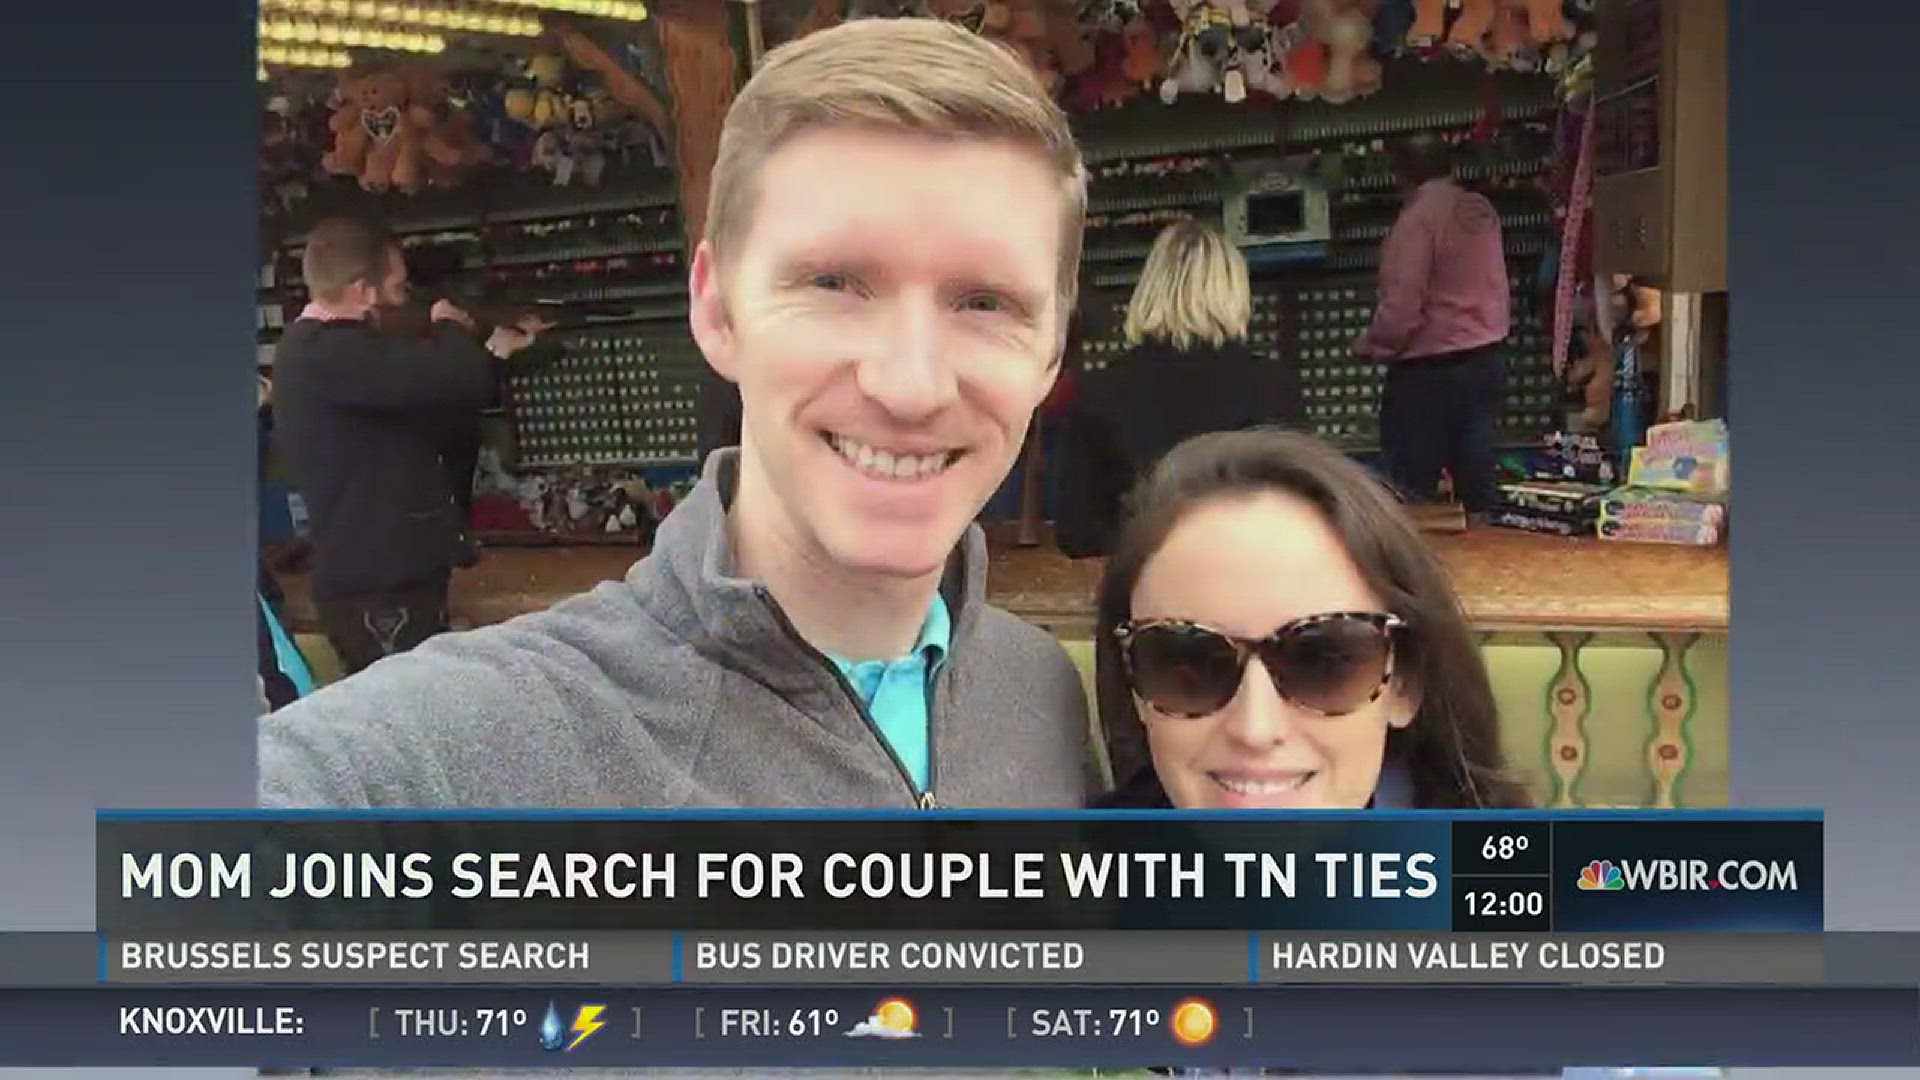 Justin and Stephanie Shults haven't been seen since Tuesday's terror attacks in Brussels.